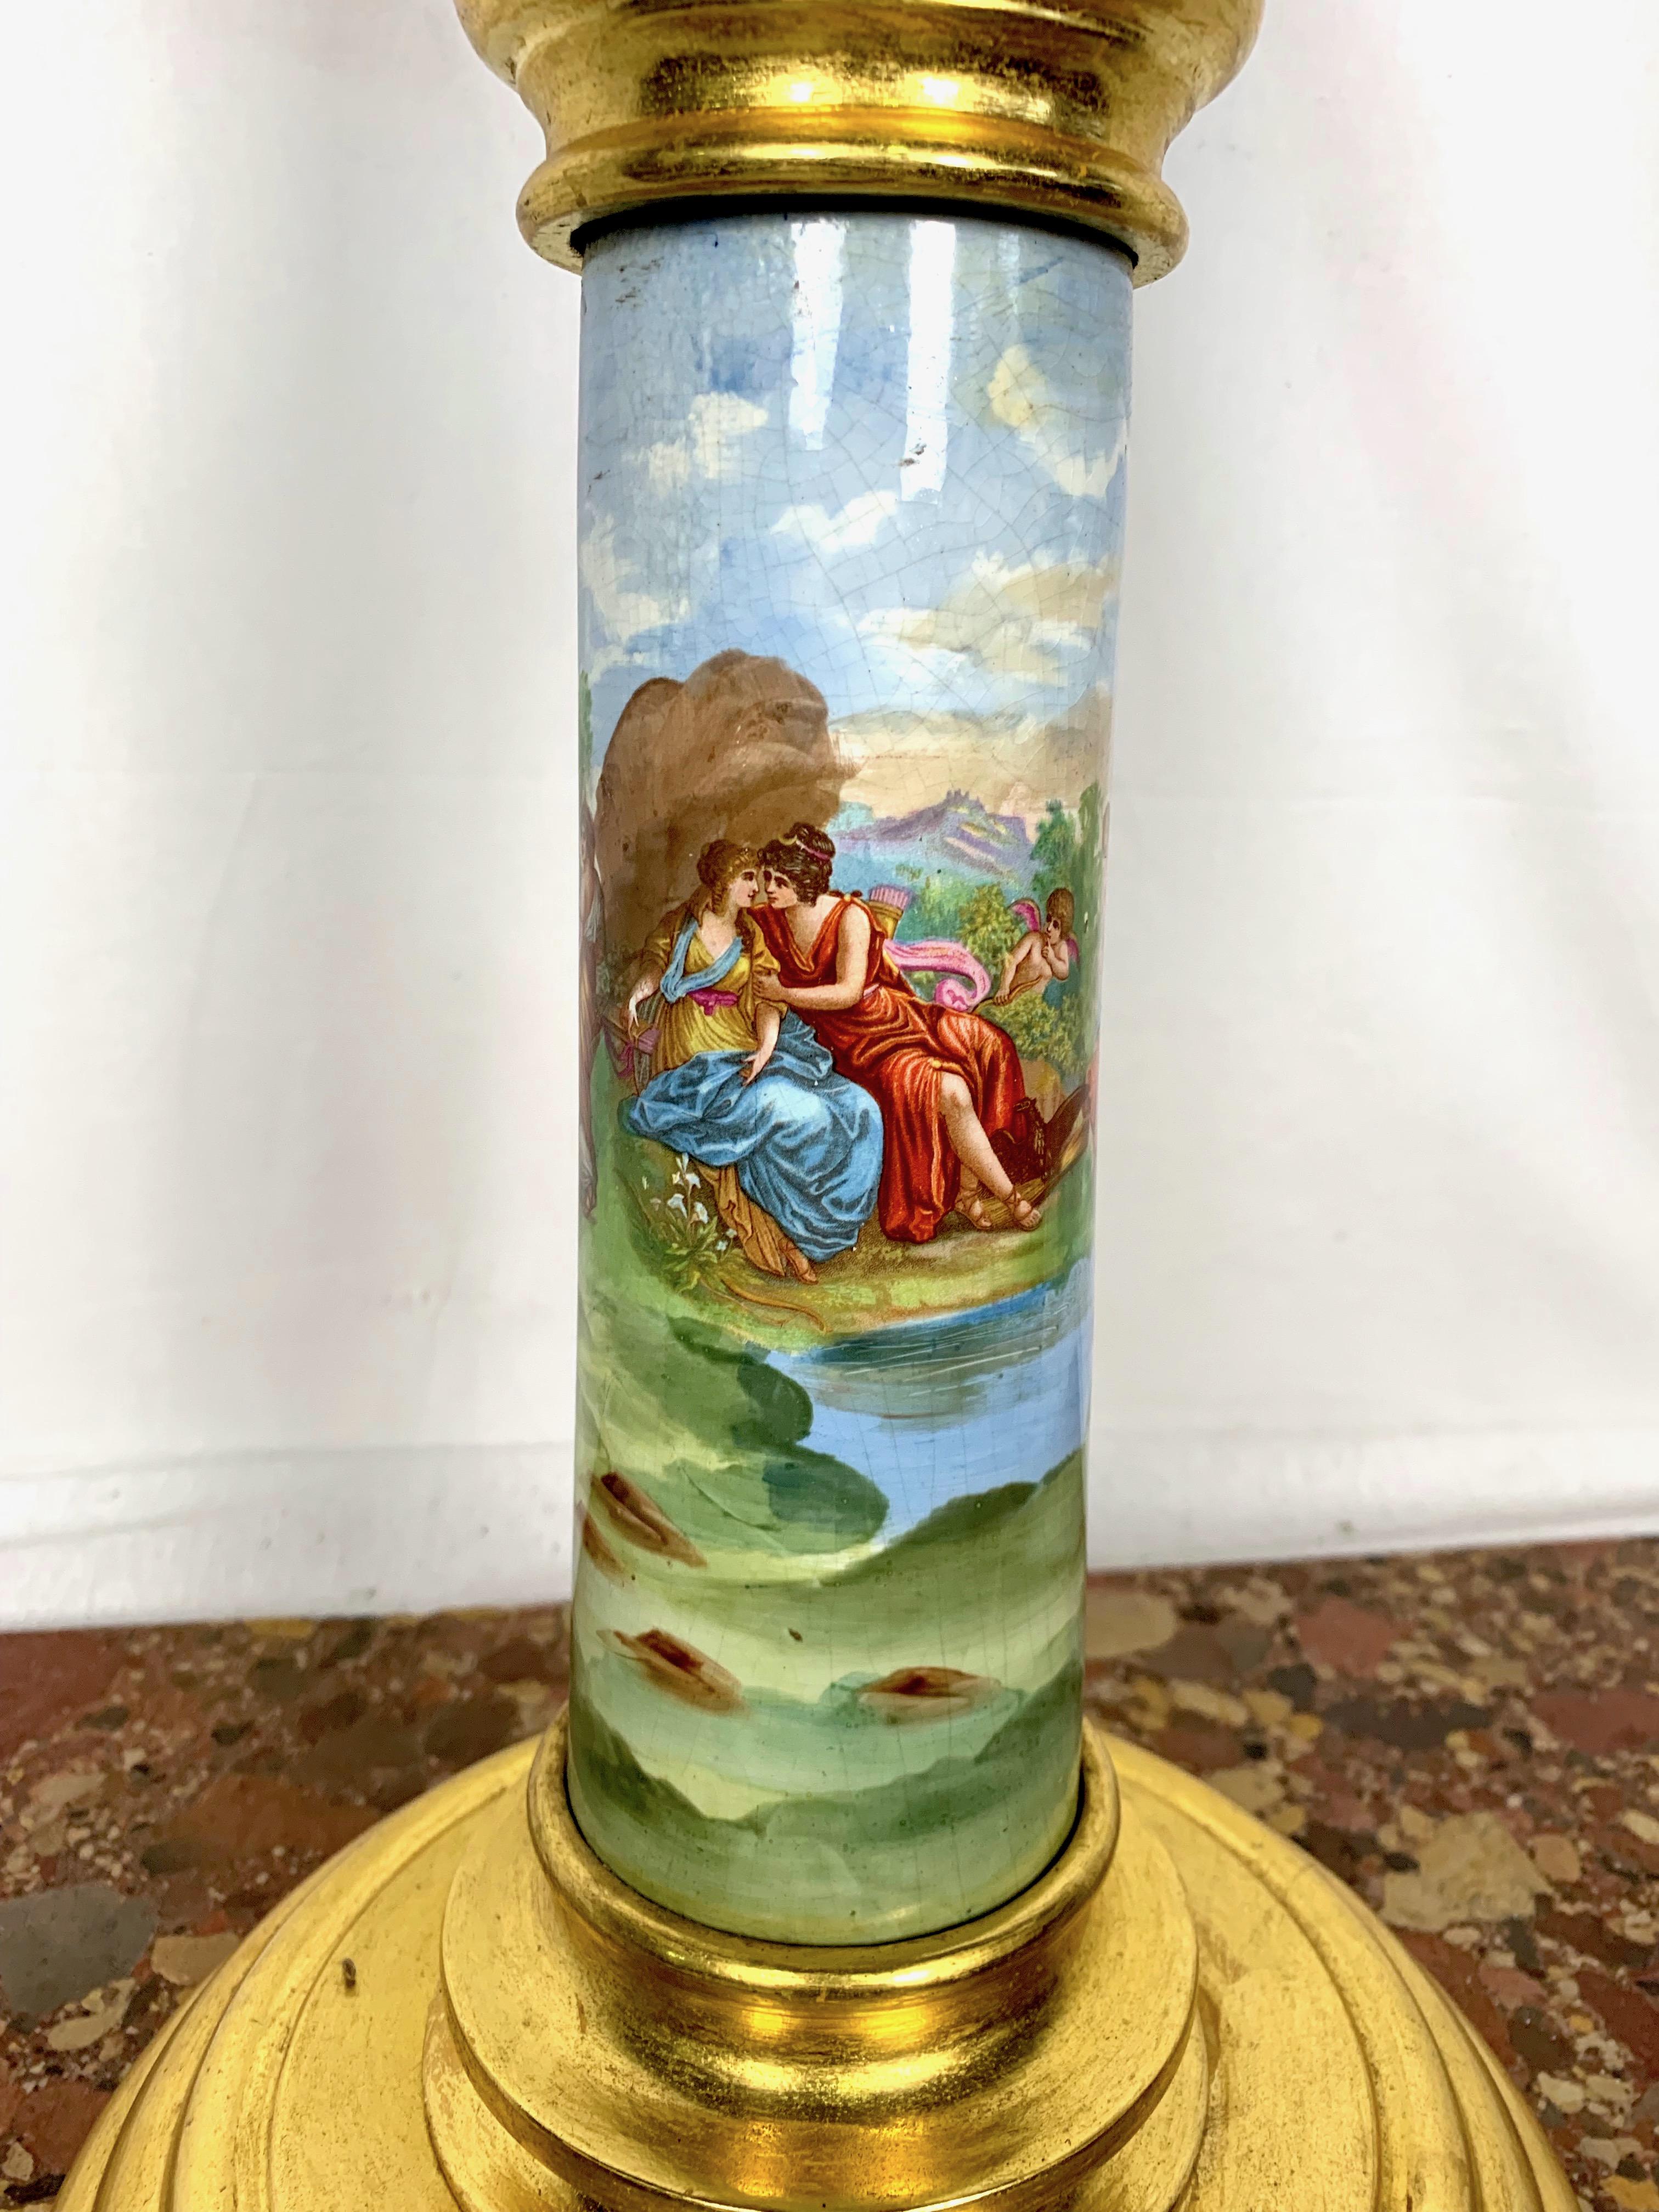 This outstanding pedestal beautifully exhibits the style and grace of the famed Sèvres porcelain manufactory. This exceptional piece features a lustrous light blue base, which provides the perfect background for the intricate gilt painting depicting